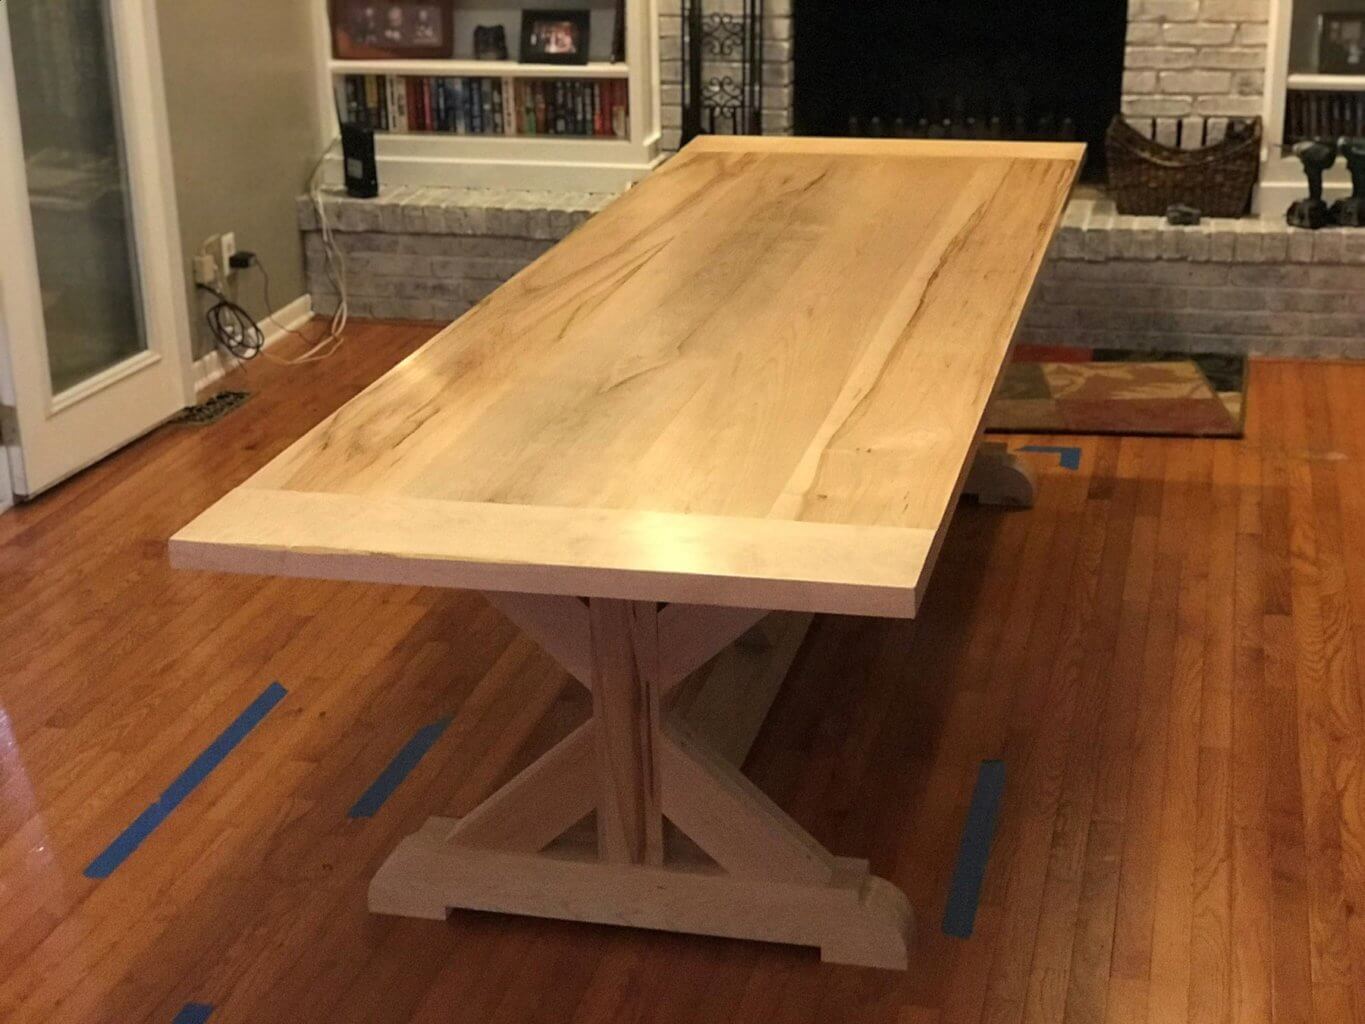 Maple Dining Room Table With Leaves